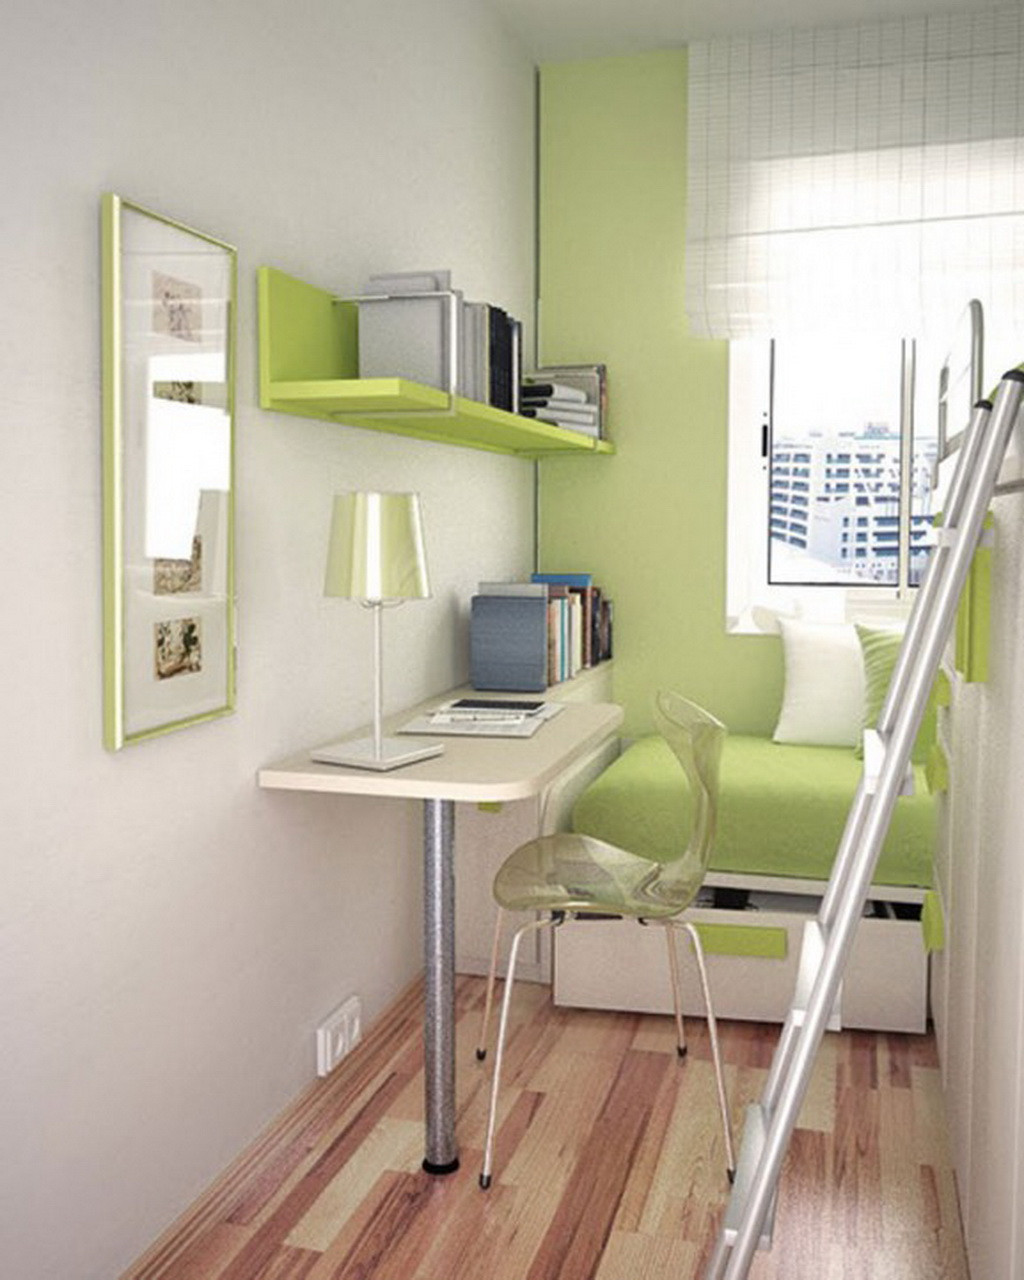 Bedroom Design For Small Space
 Small Space Design Ideas for Your Teen’s Room